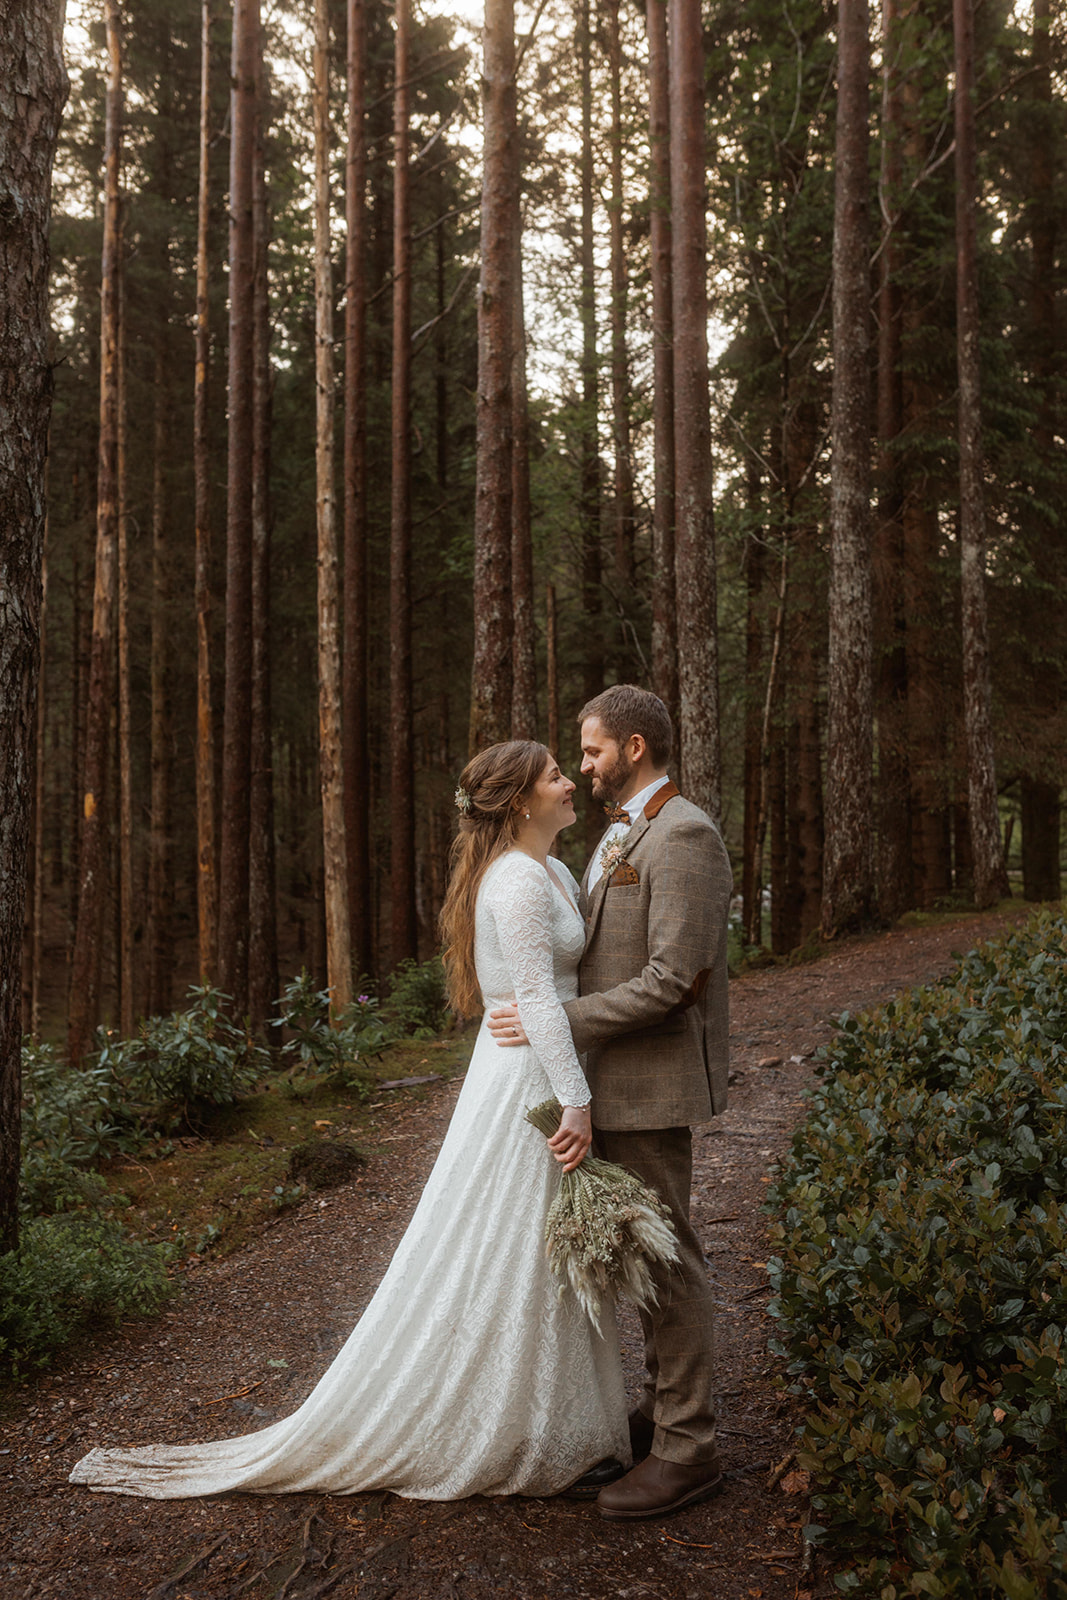 Holly and James explored the woods of Glencoe, Isle of Skye during their elopement day.